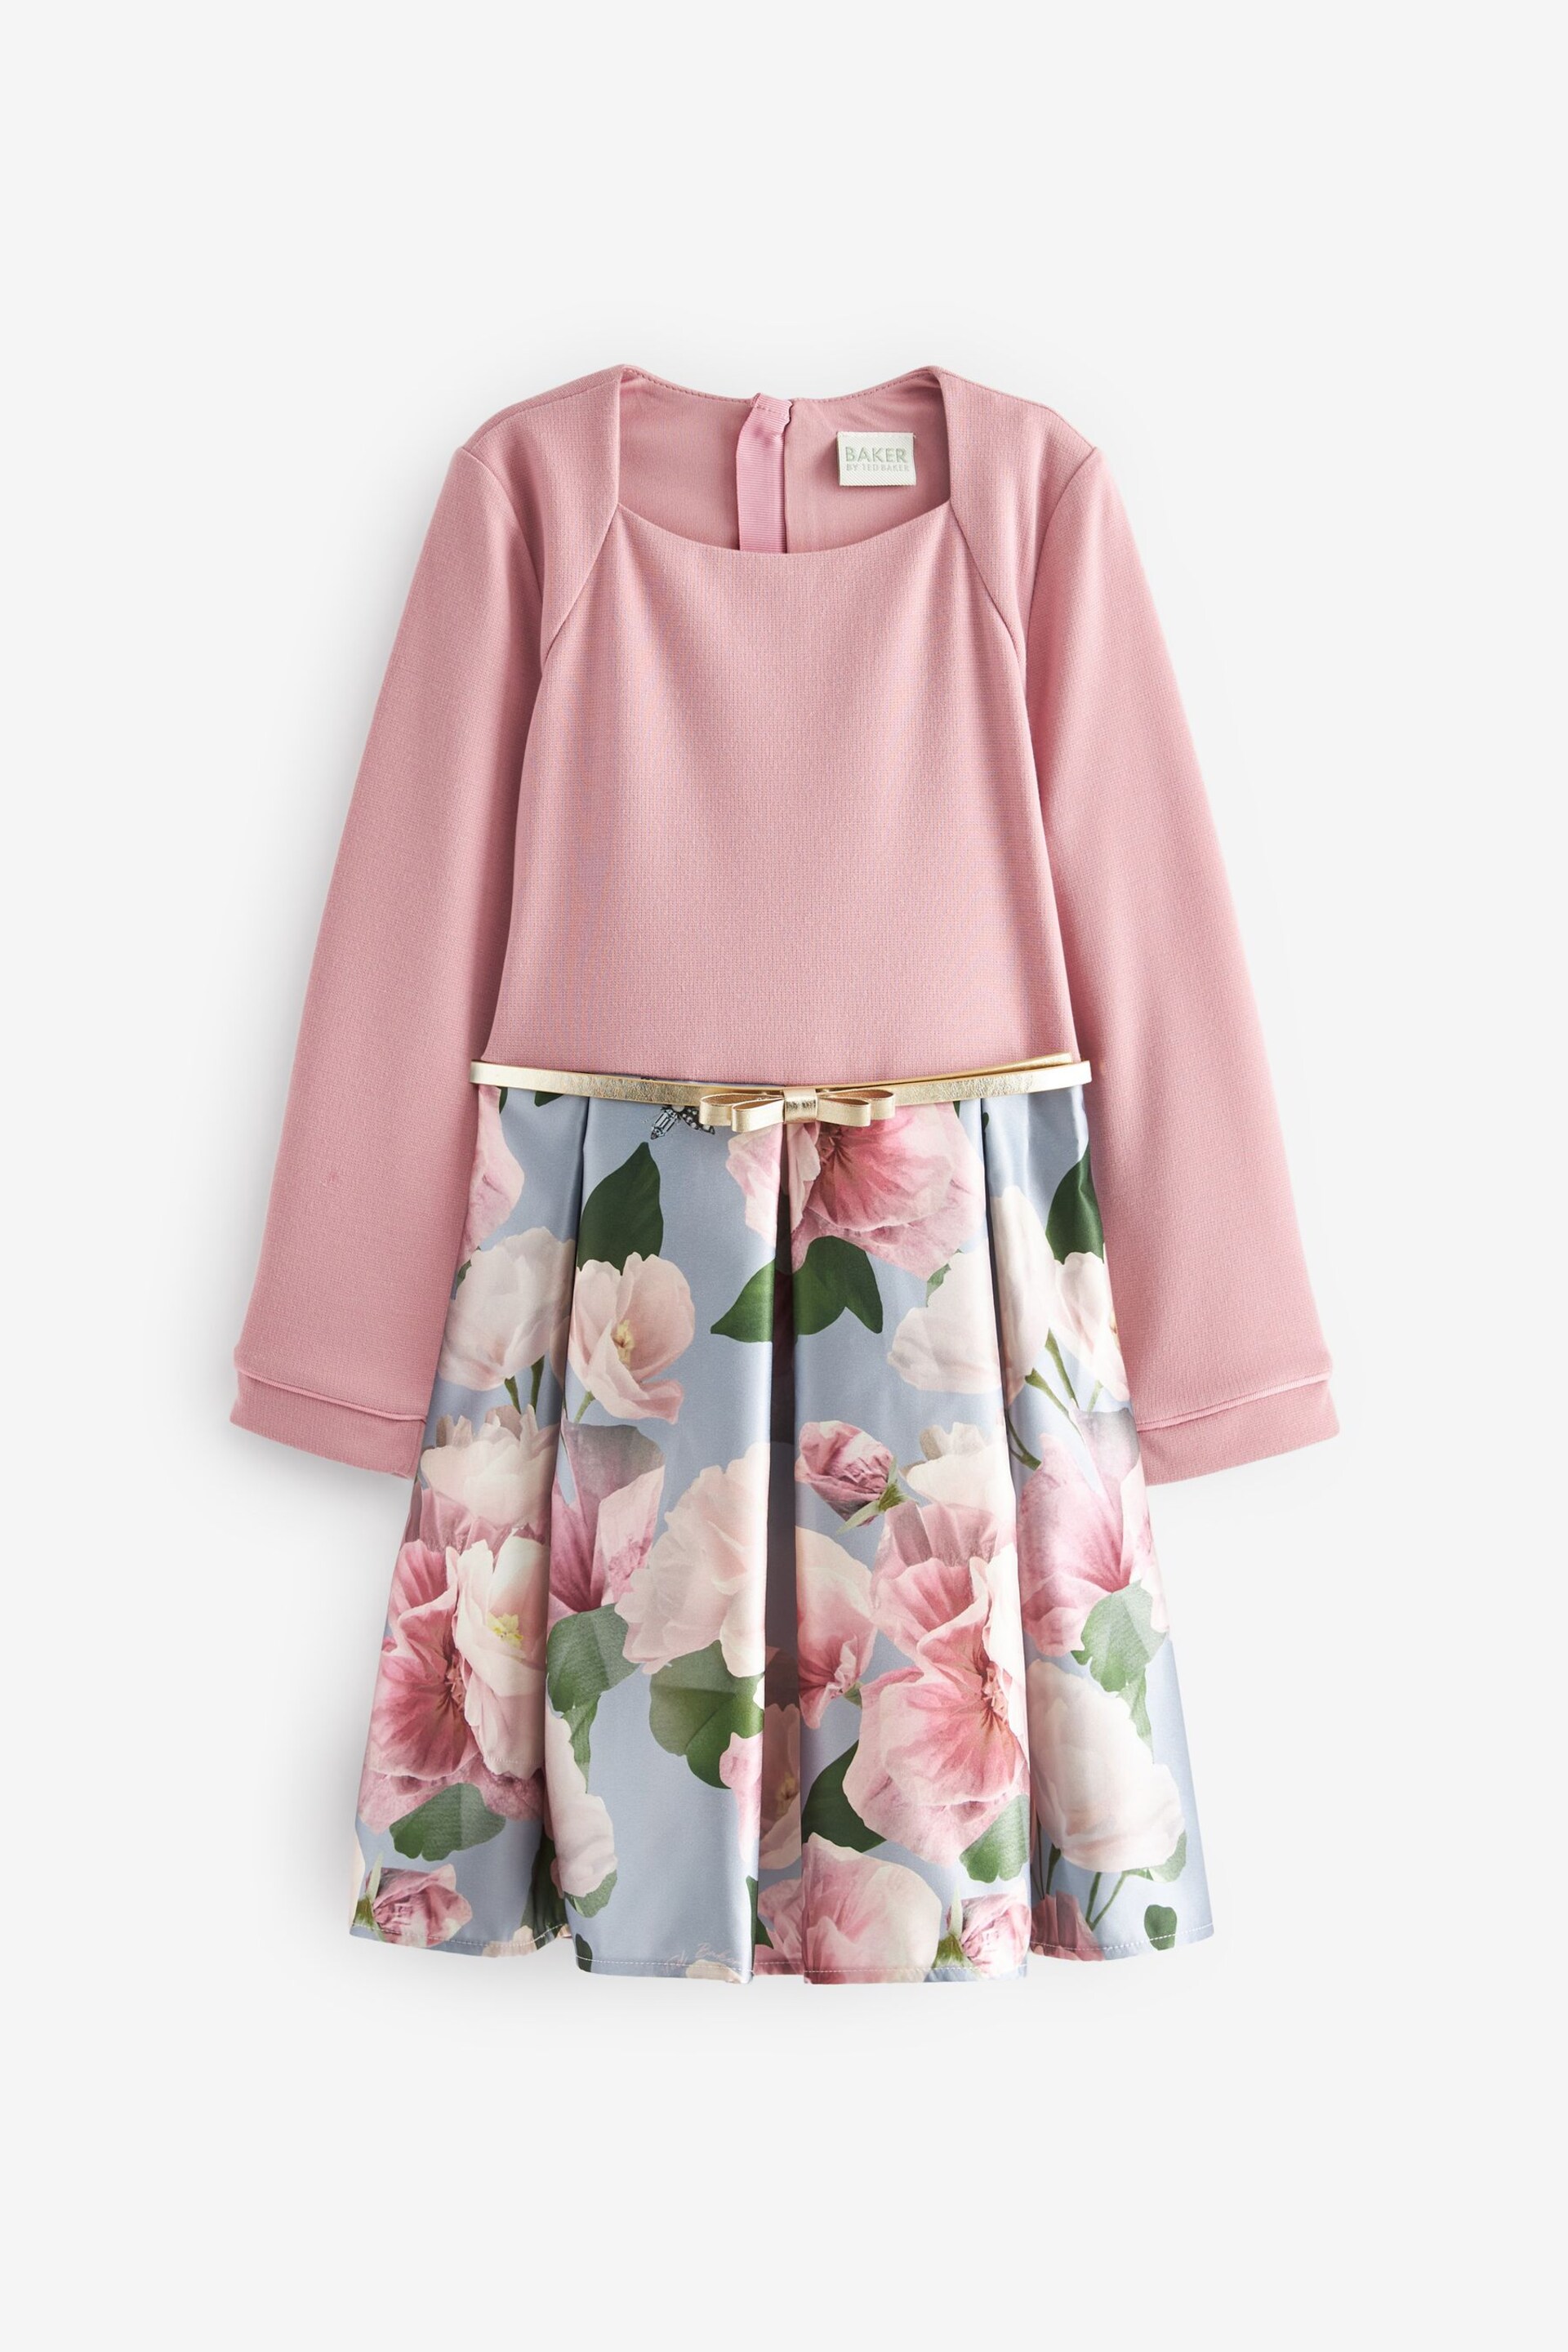 Baker by Ted Baker Pink Long Sleeve Floral Dress - Image 6 of 9